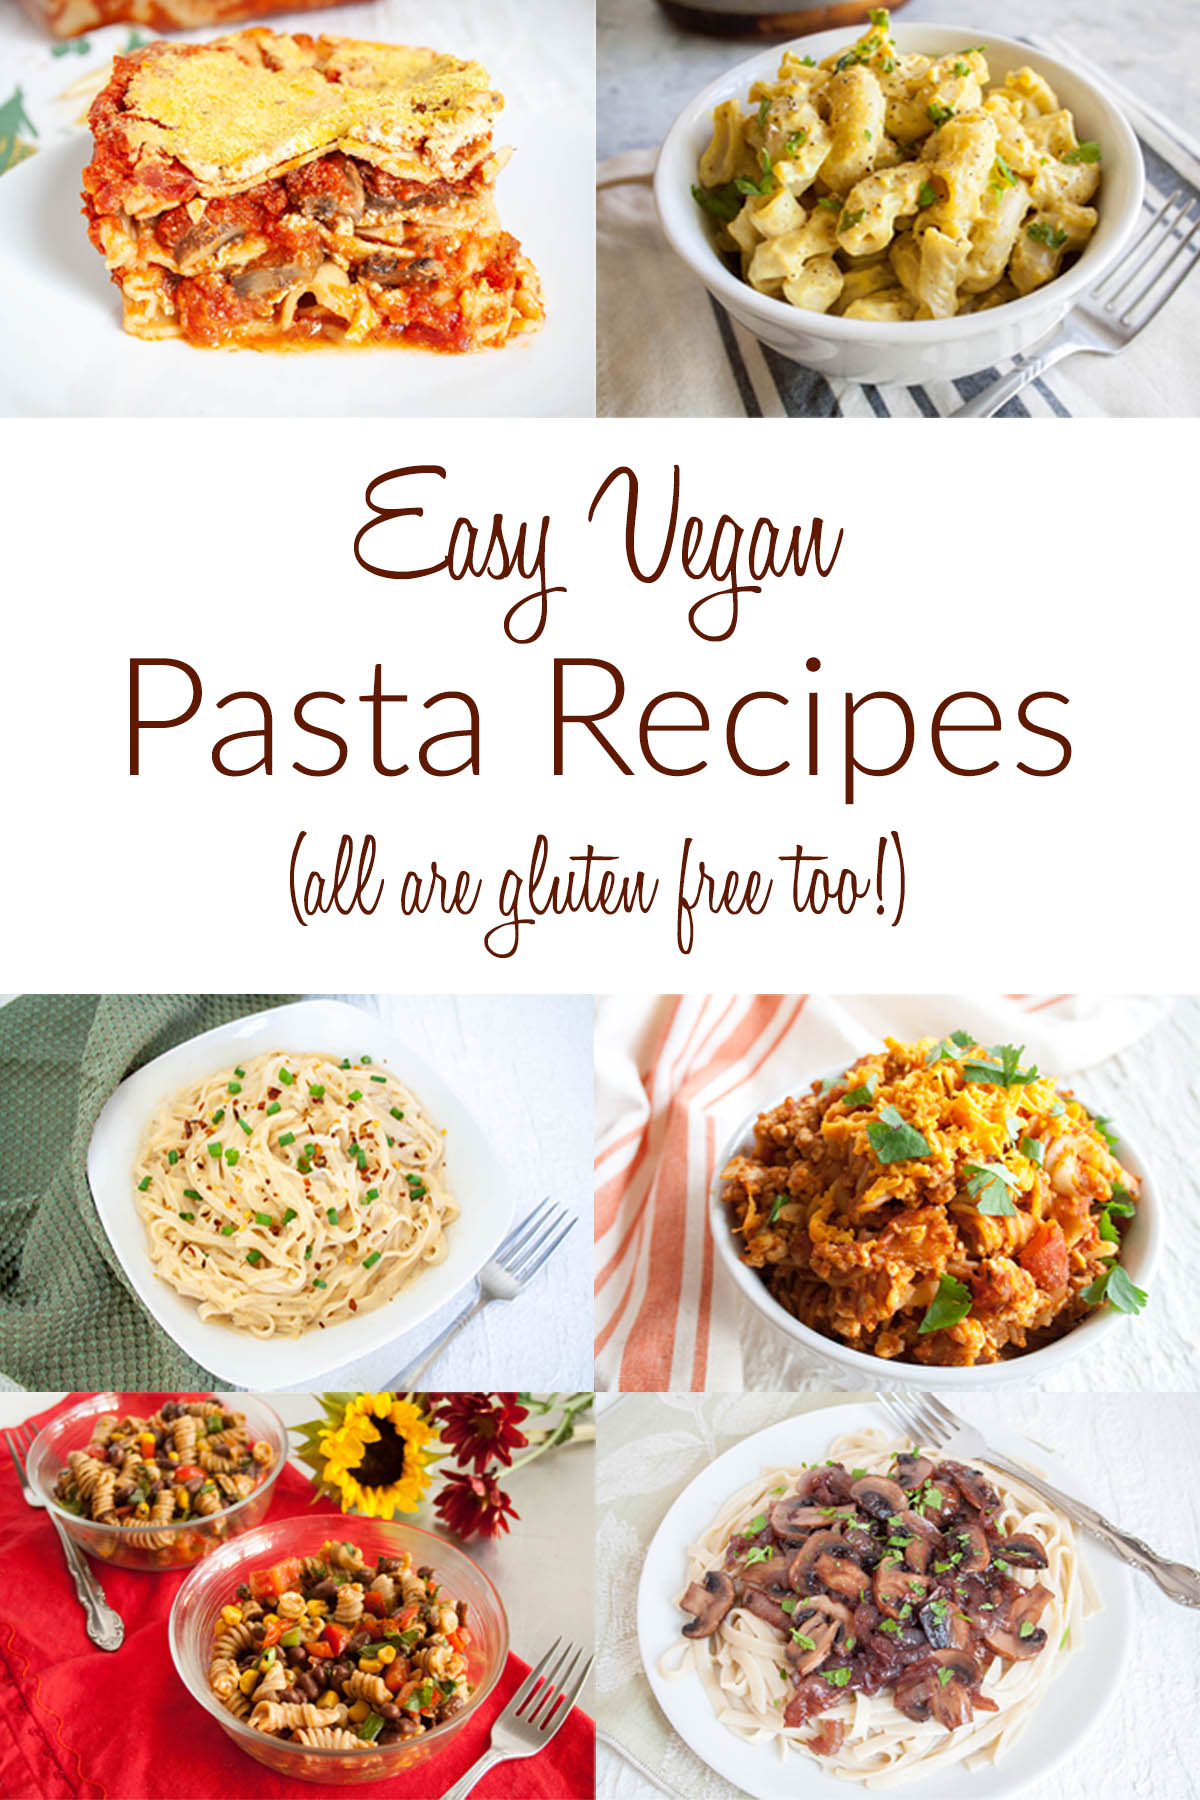 Easy Vegan Pasta Recipes collage photo with text.